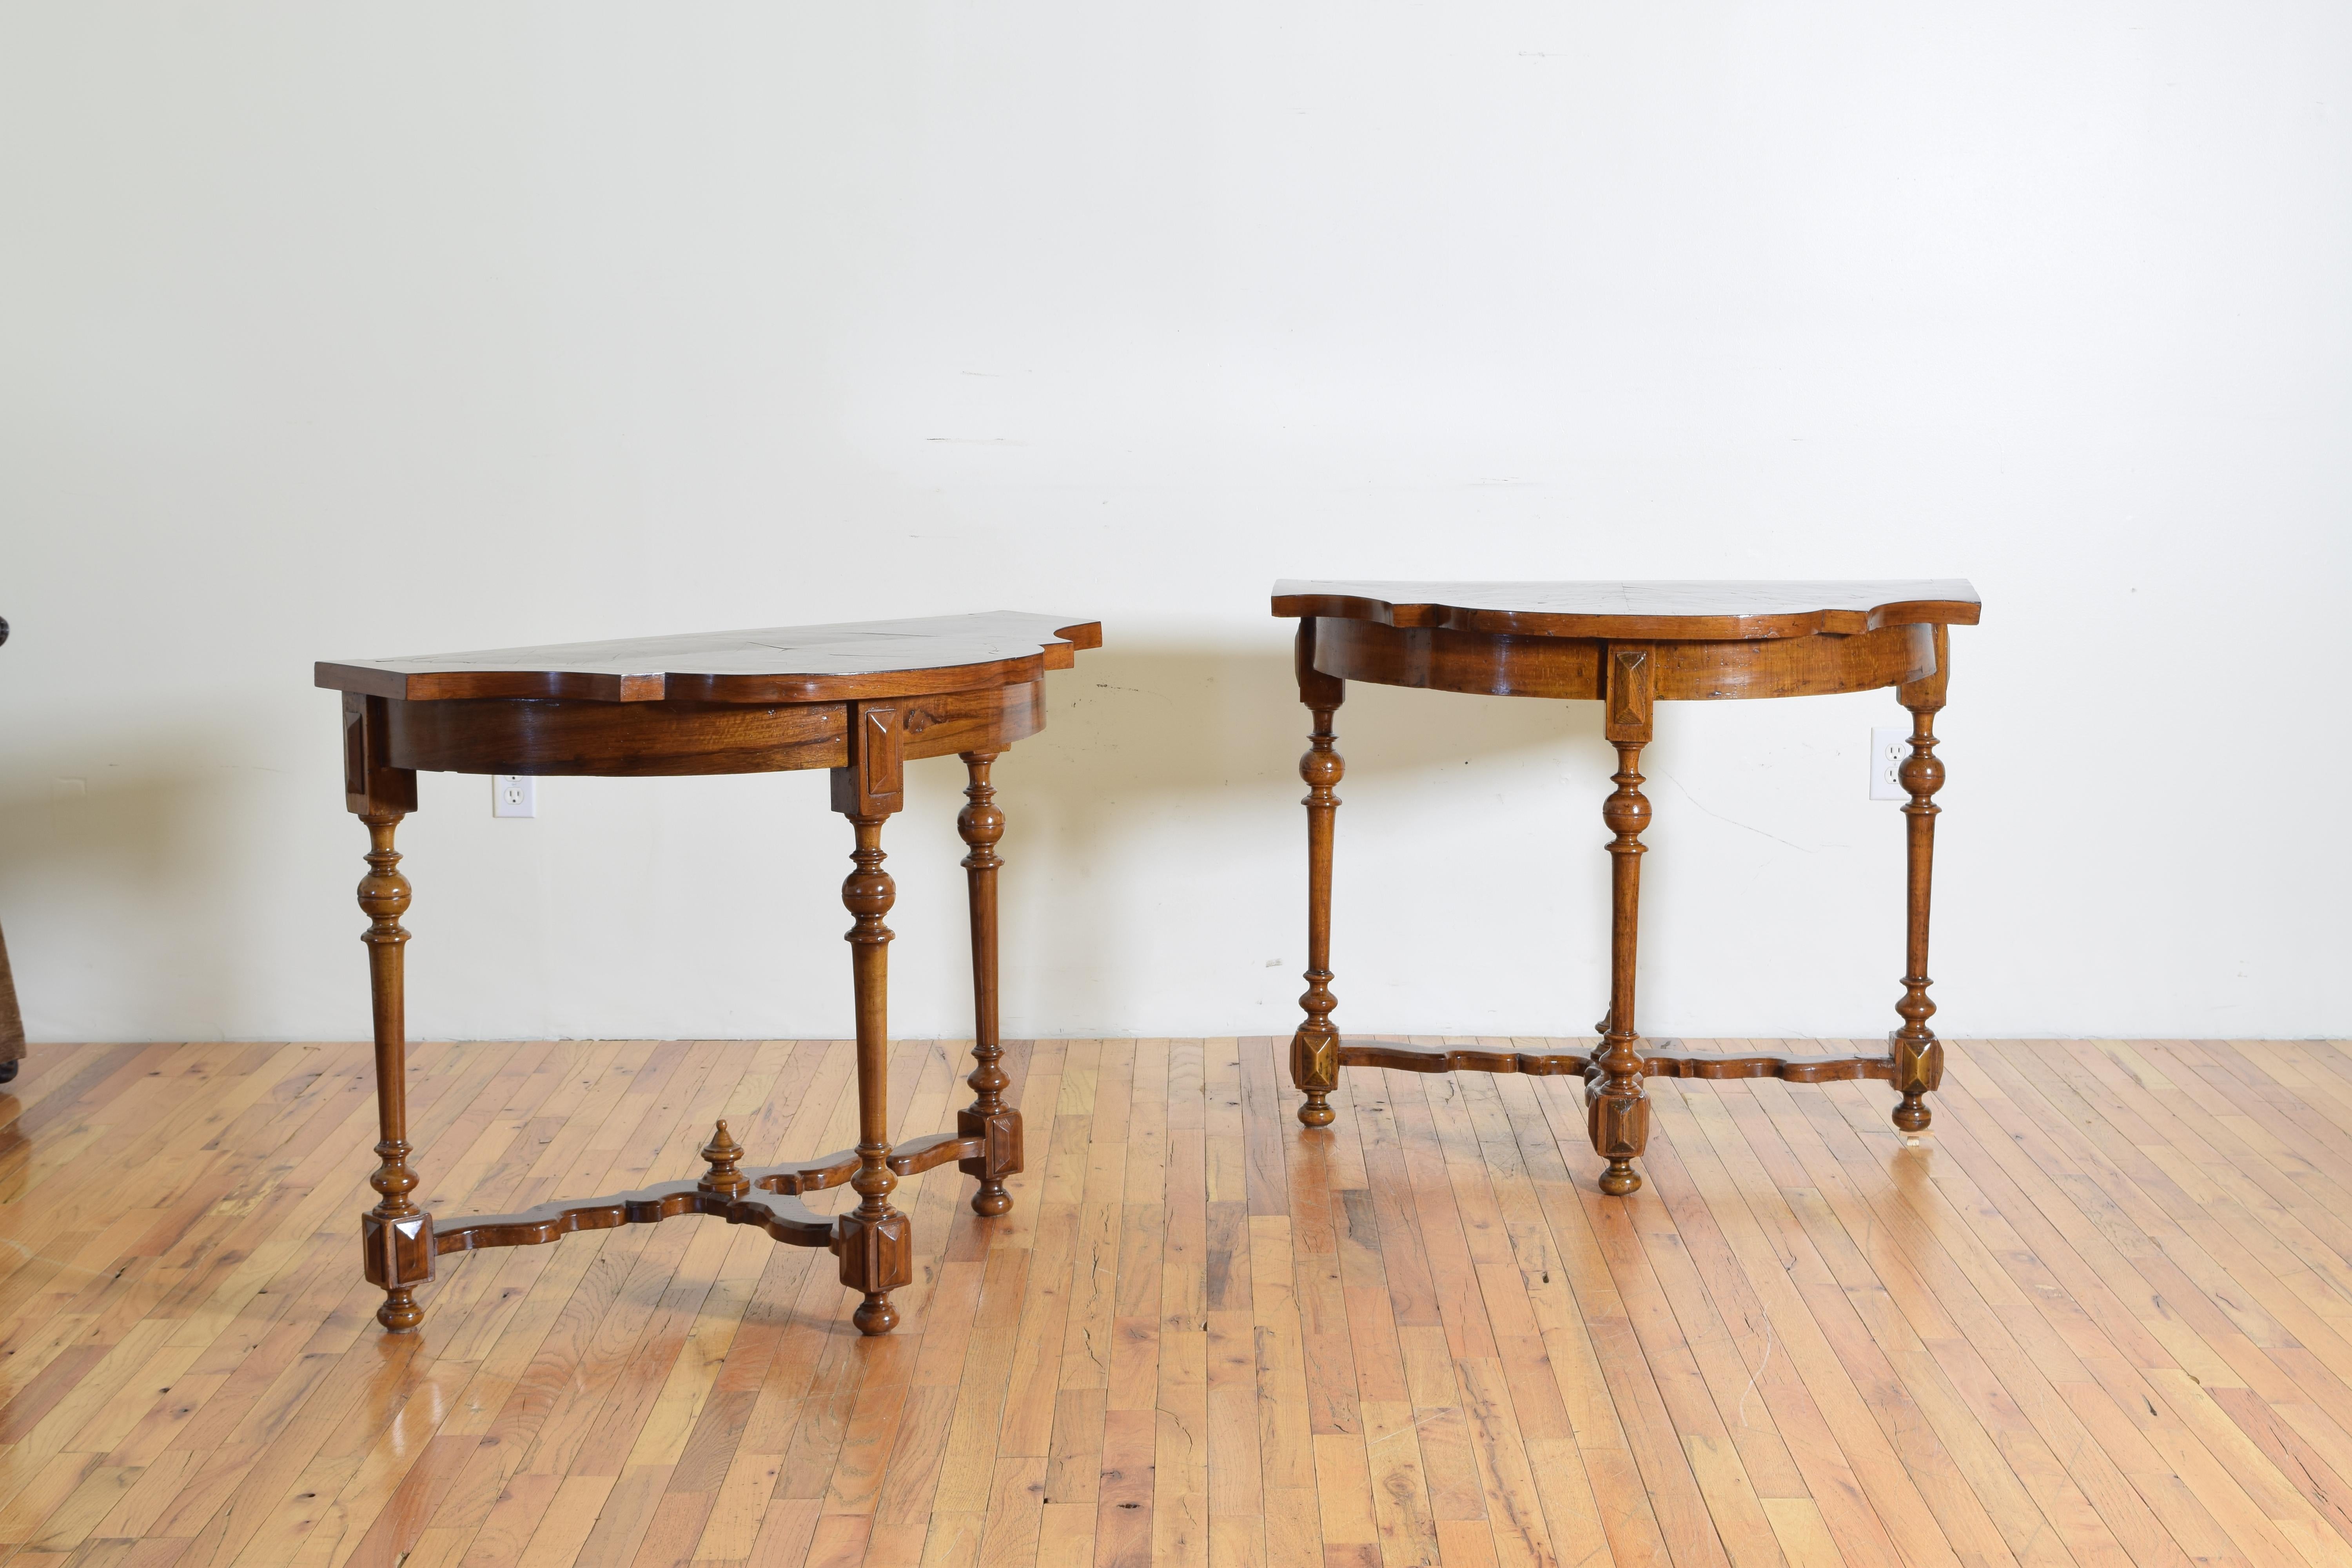 Having exaggerated bow shaped tops veneered in walnut banding and olivewood interiors, below the top are demilune shaped aprons, the turned legs with centered medallions at their tops. The legs joined by shaped stretchers.